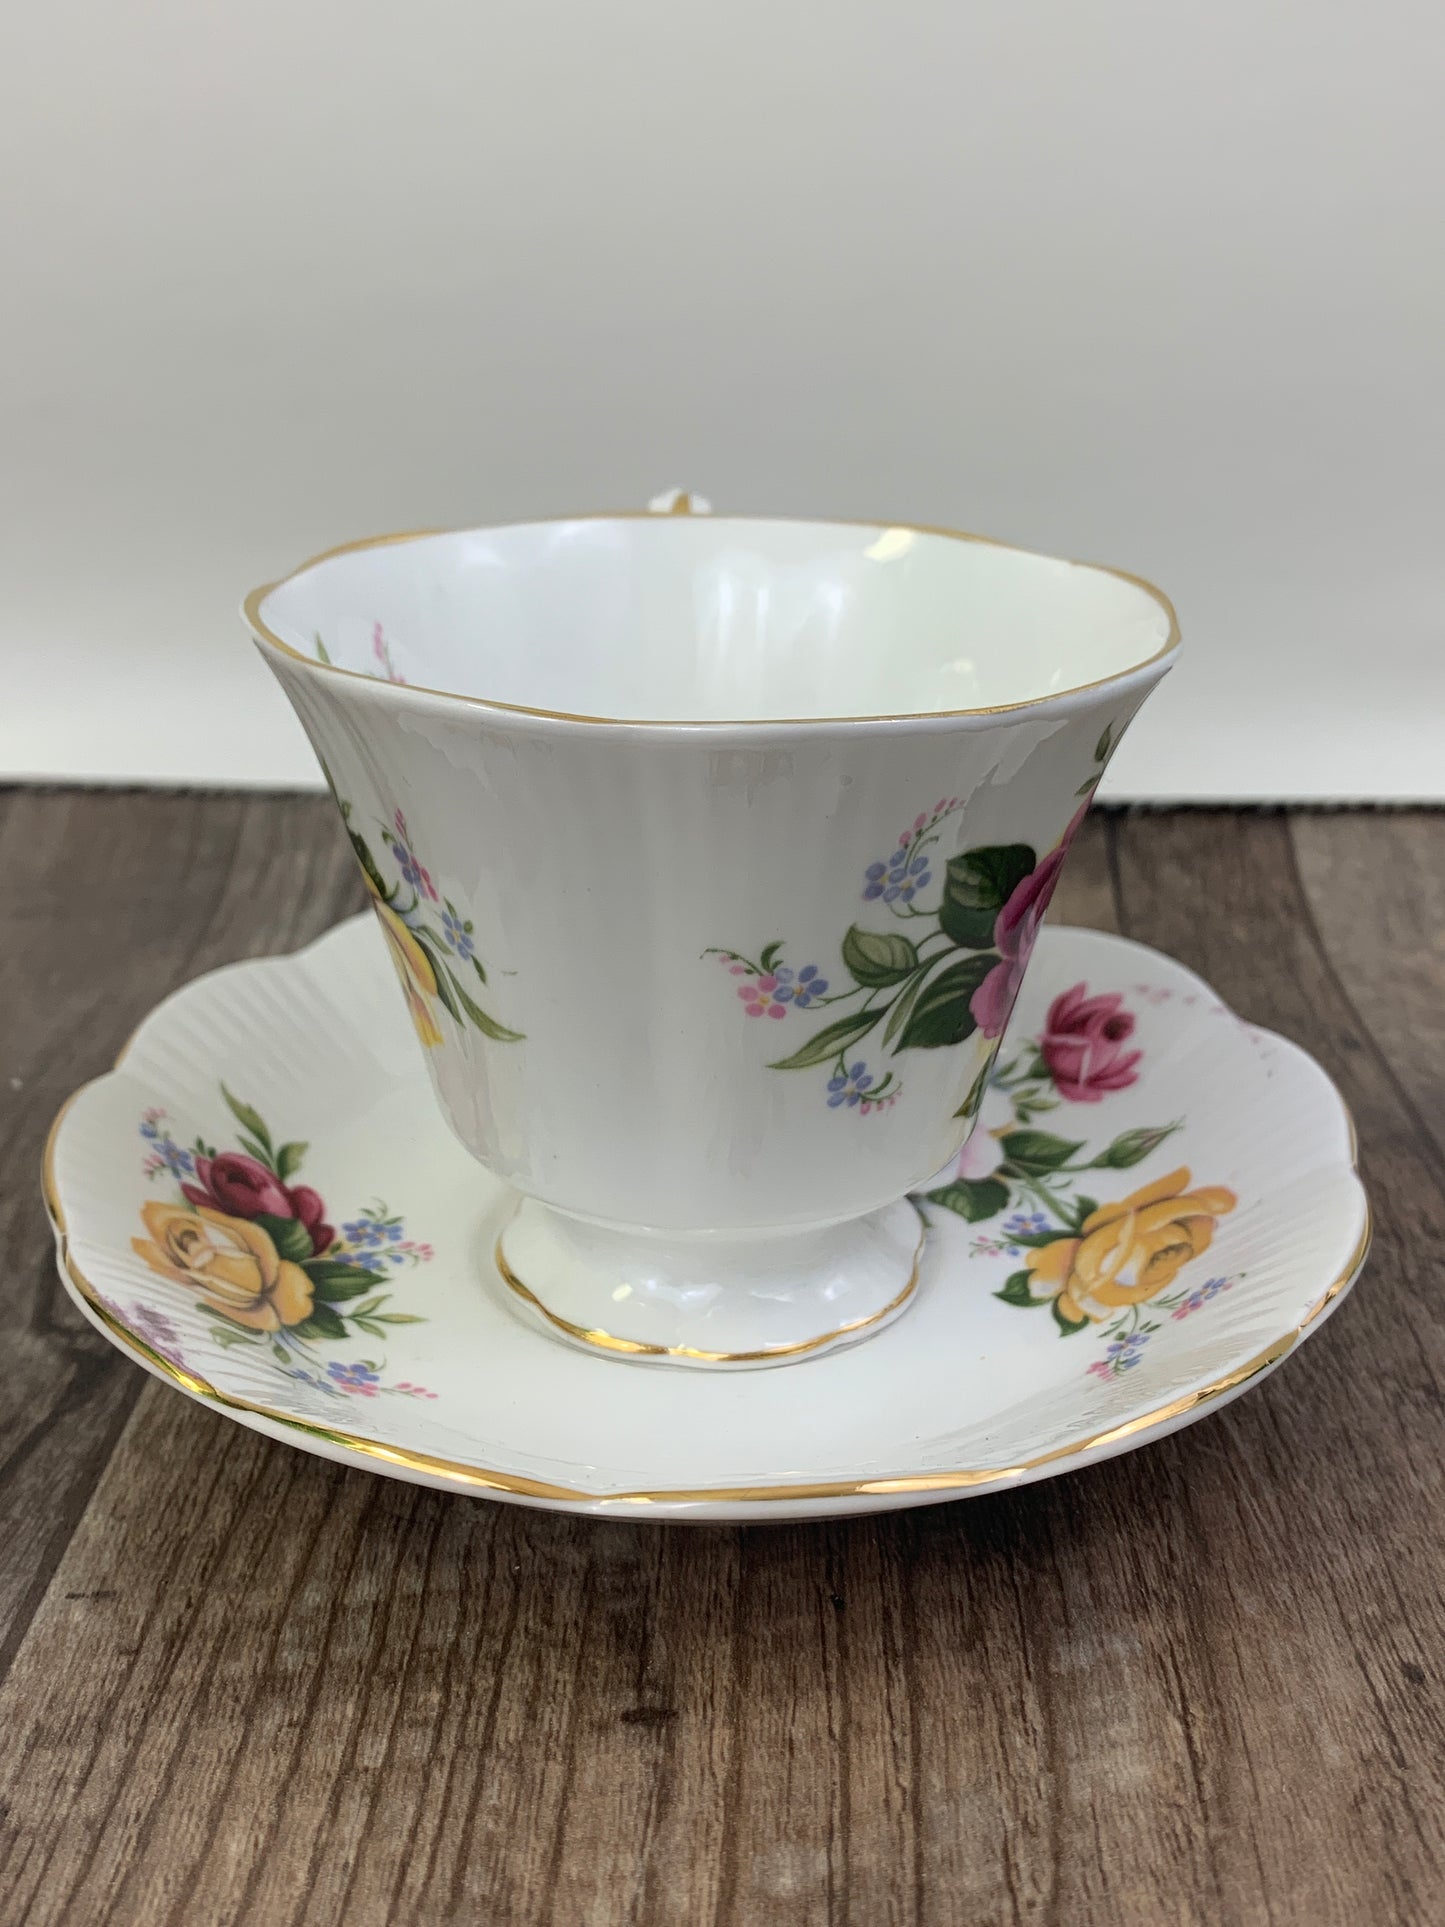 Pink, Yellow, and Red Floral Teacup and Saucer